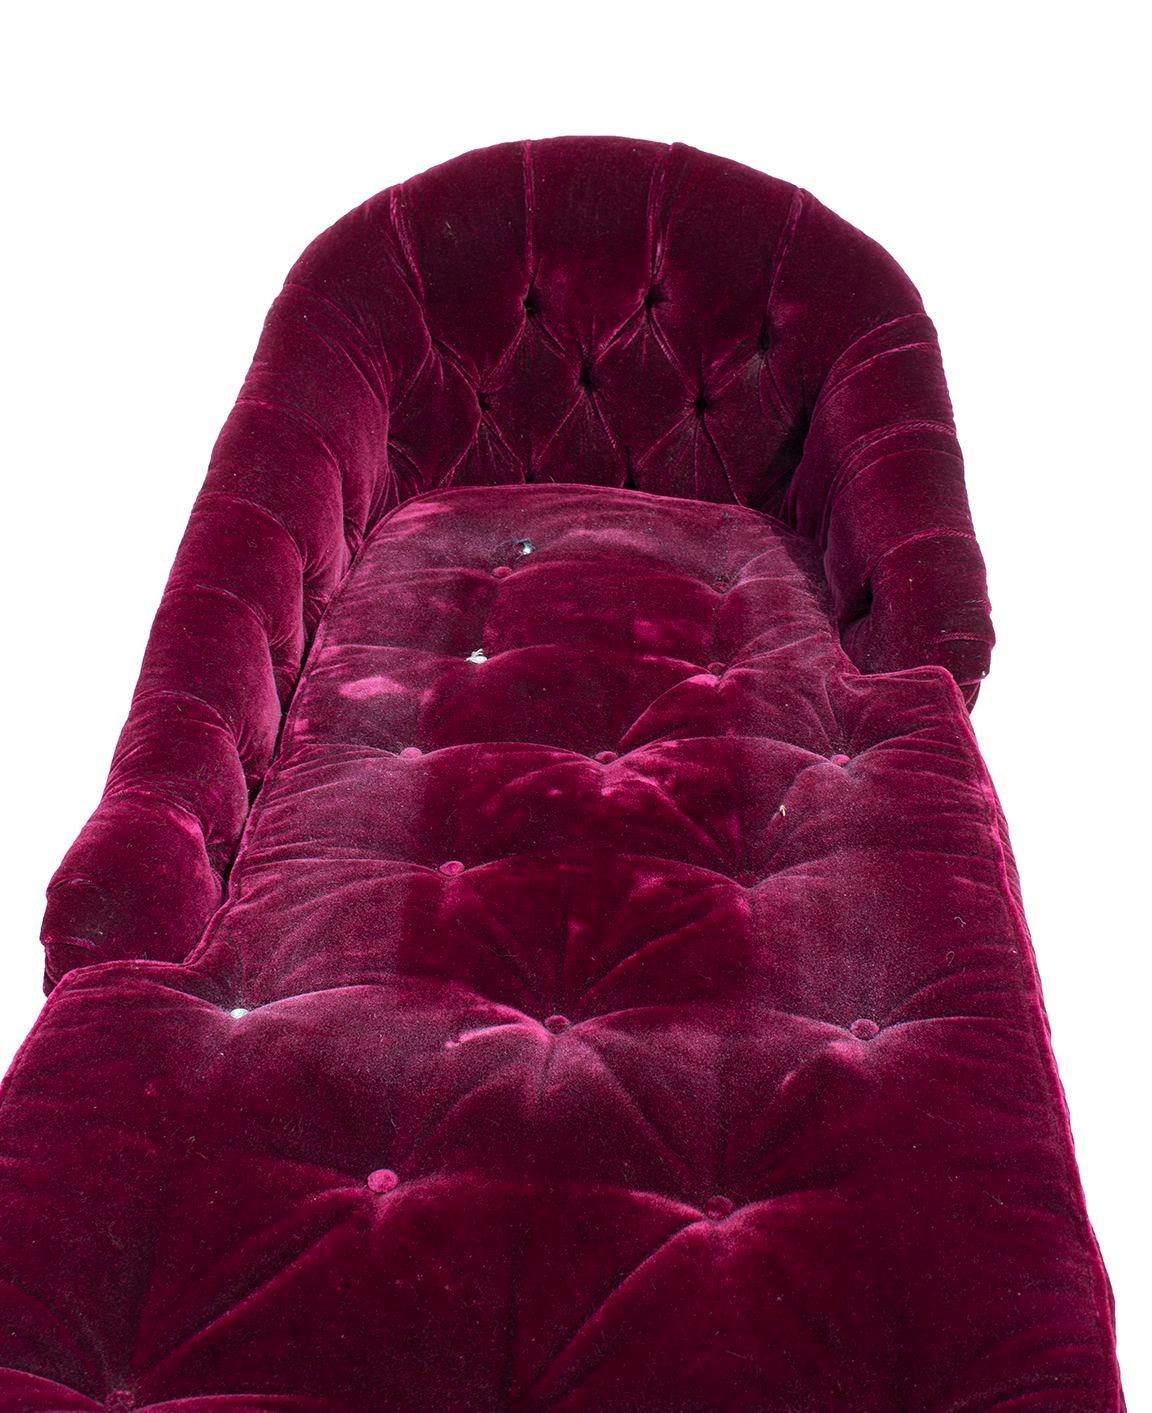 Mid-20th Century Tufted Chaise Lounge for Reupholstery